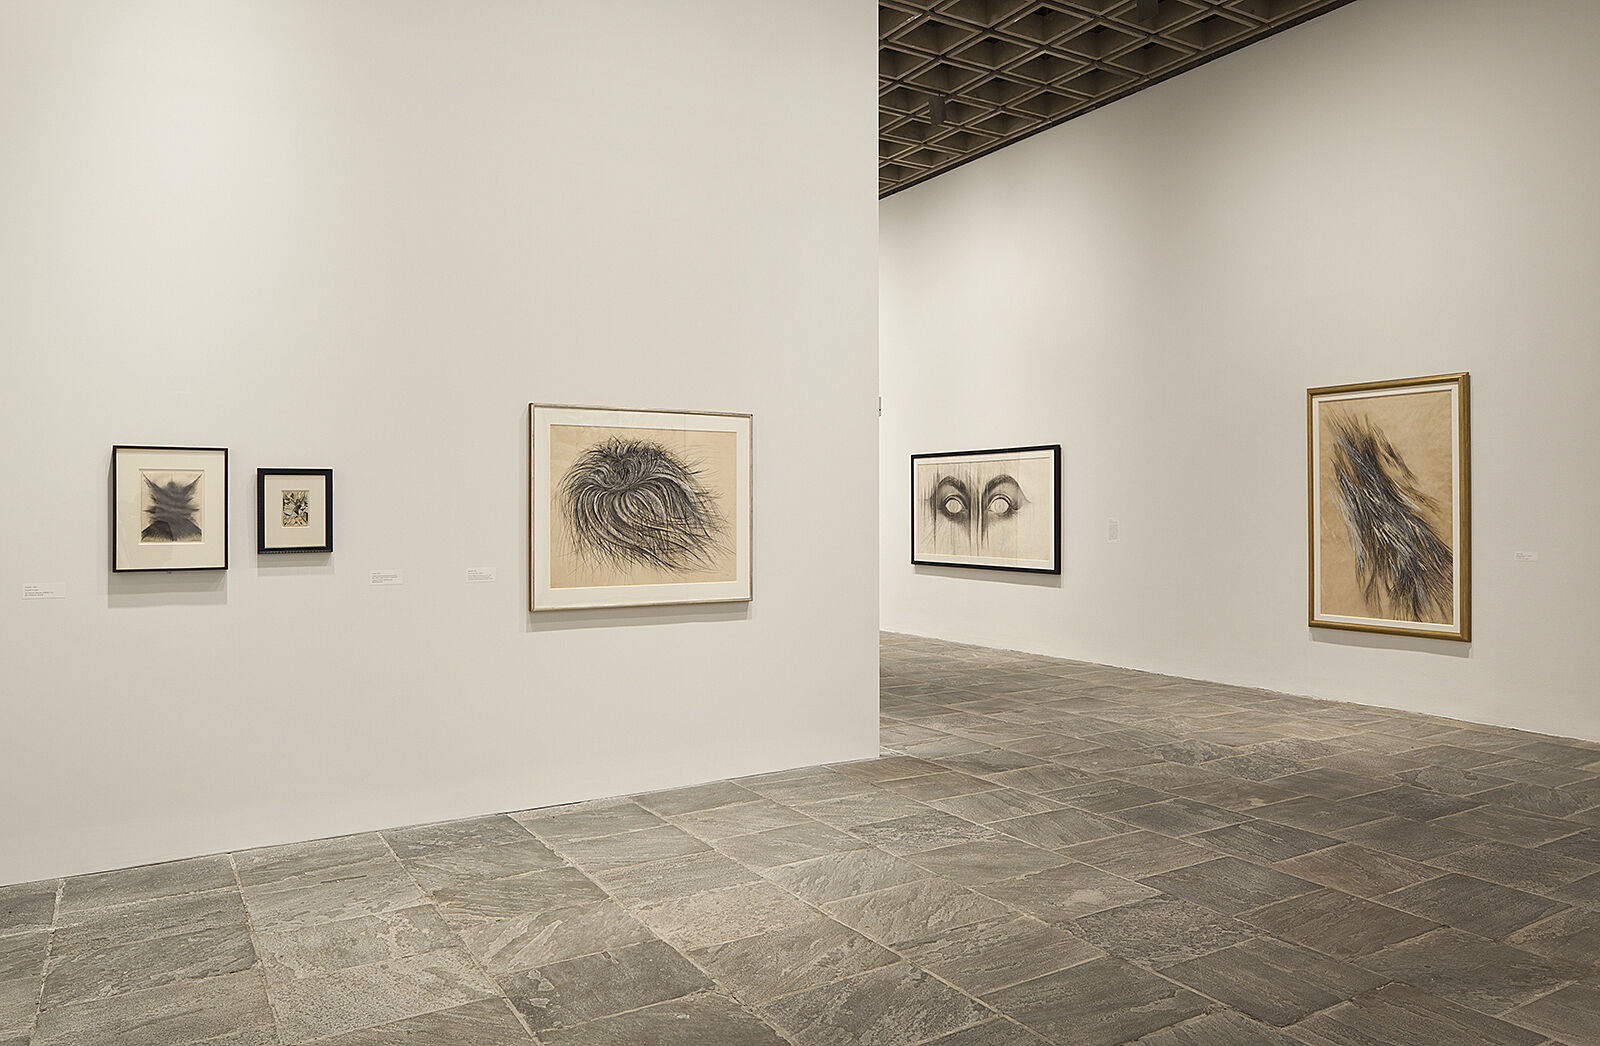 Adjacent walls that hold Jay DeFeo paintings.